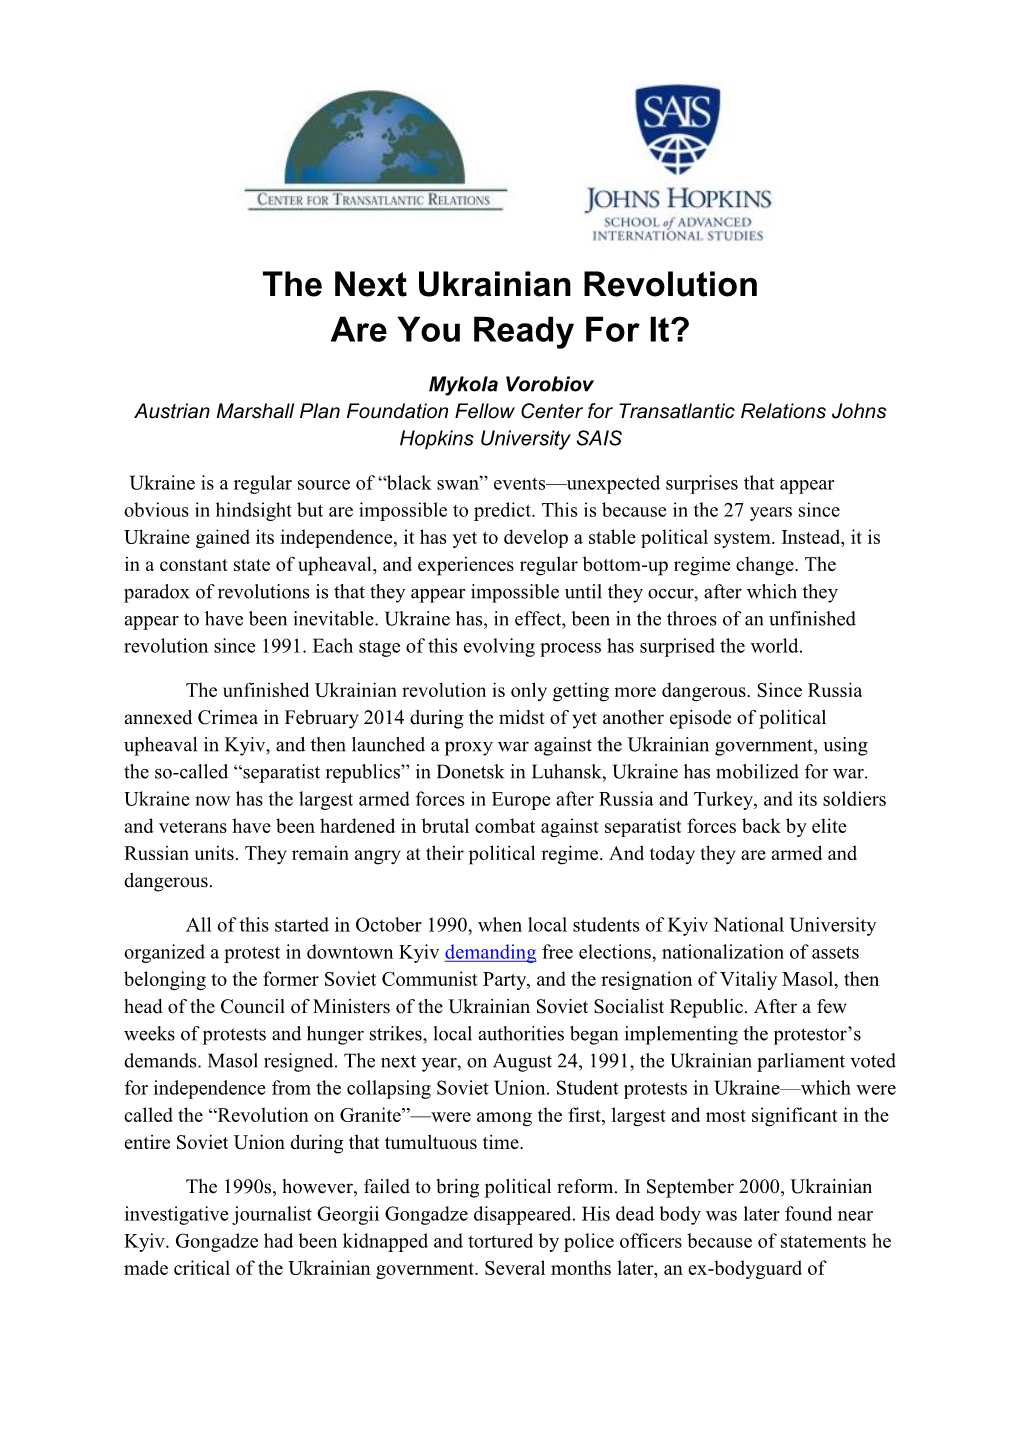 The Next Ukrainian Revolution Are You Ready for It?